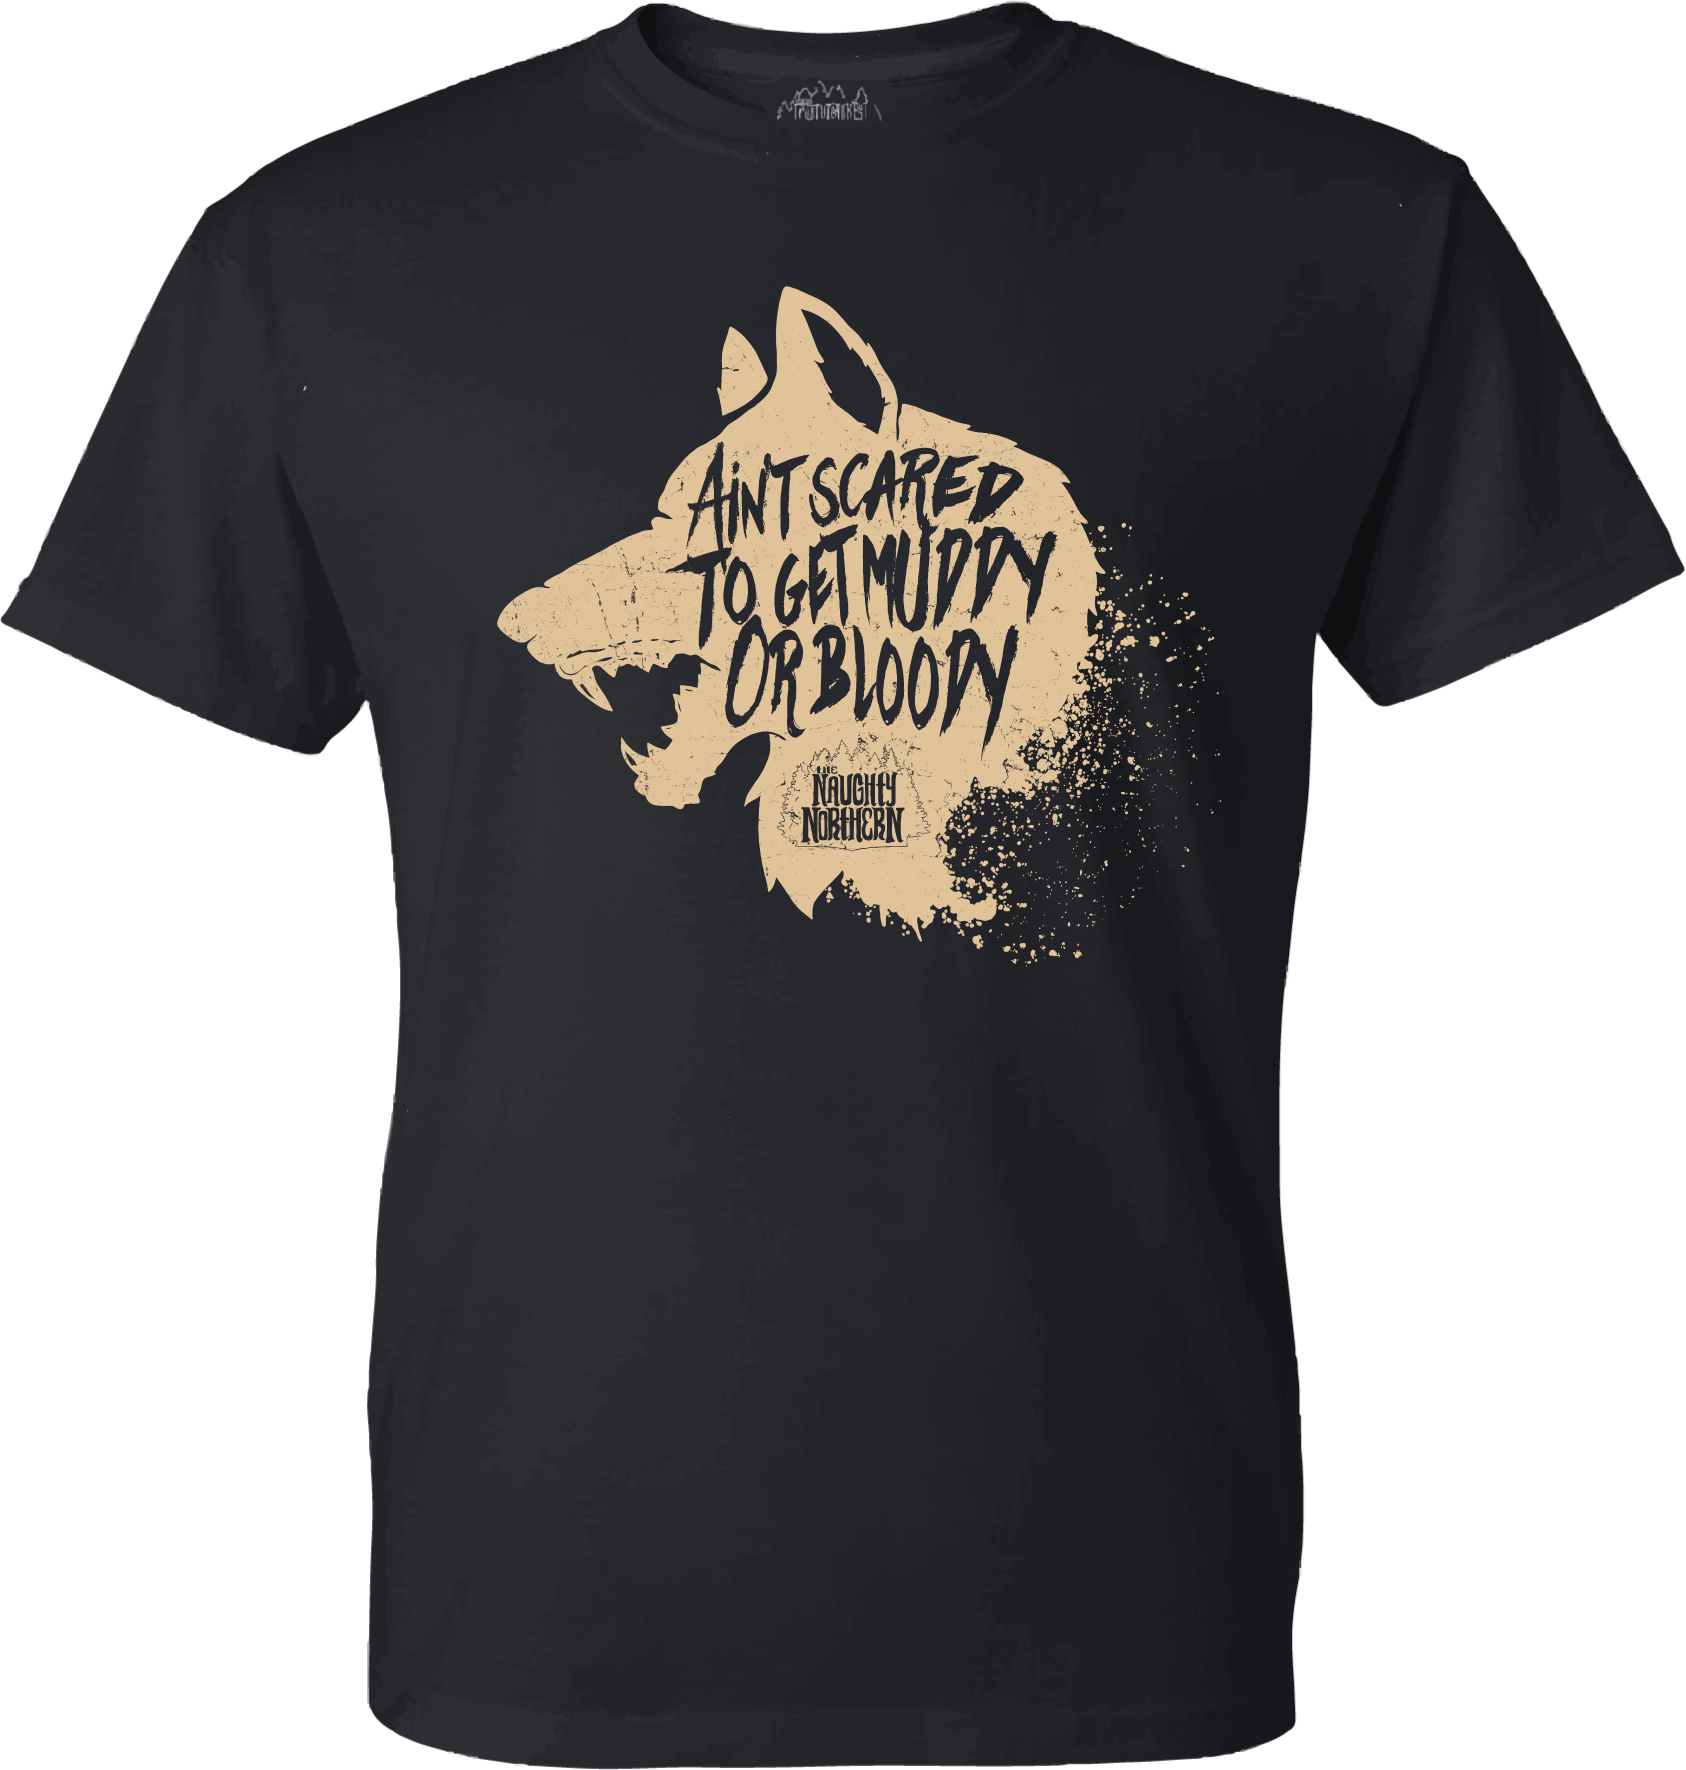 T-Shirt : Ain't Scared to Get Muddy or Bloody